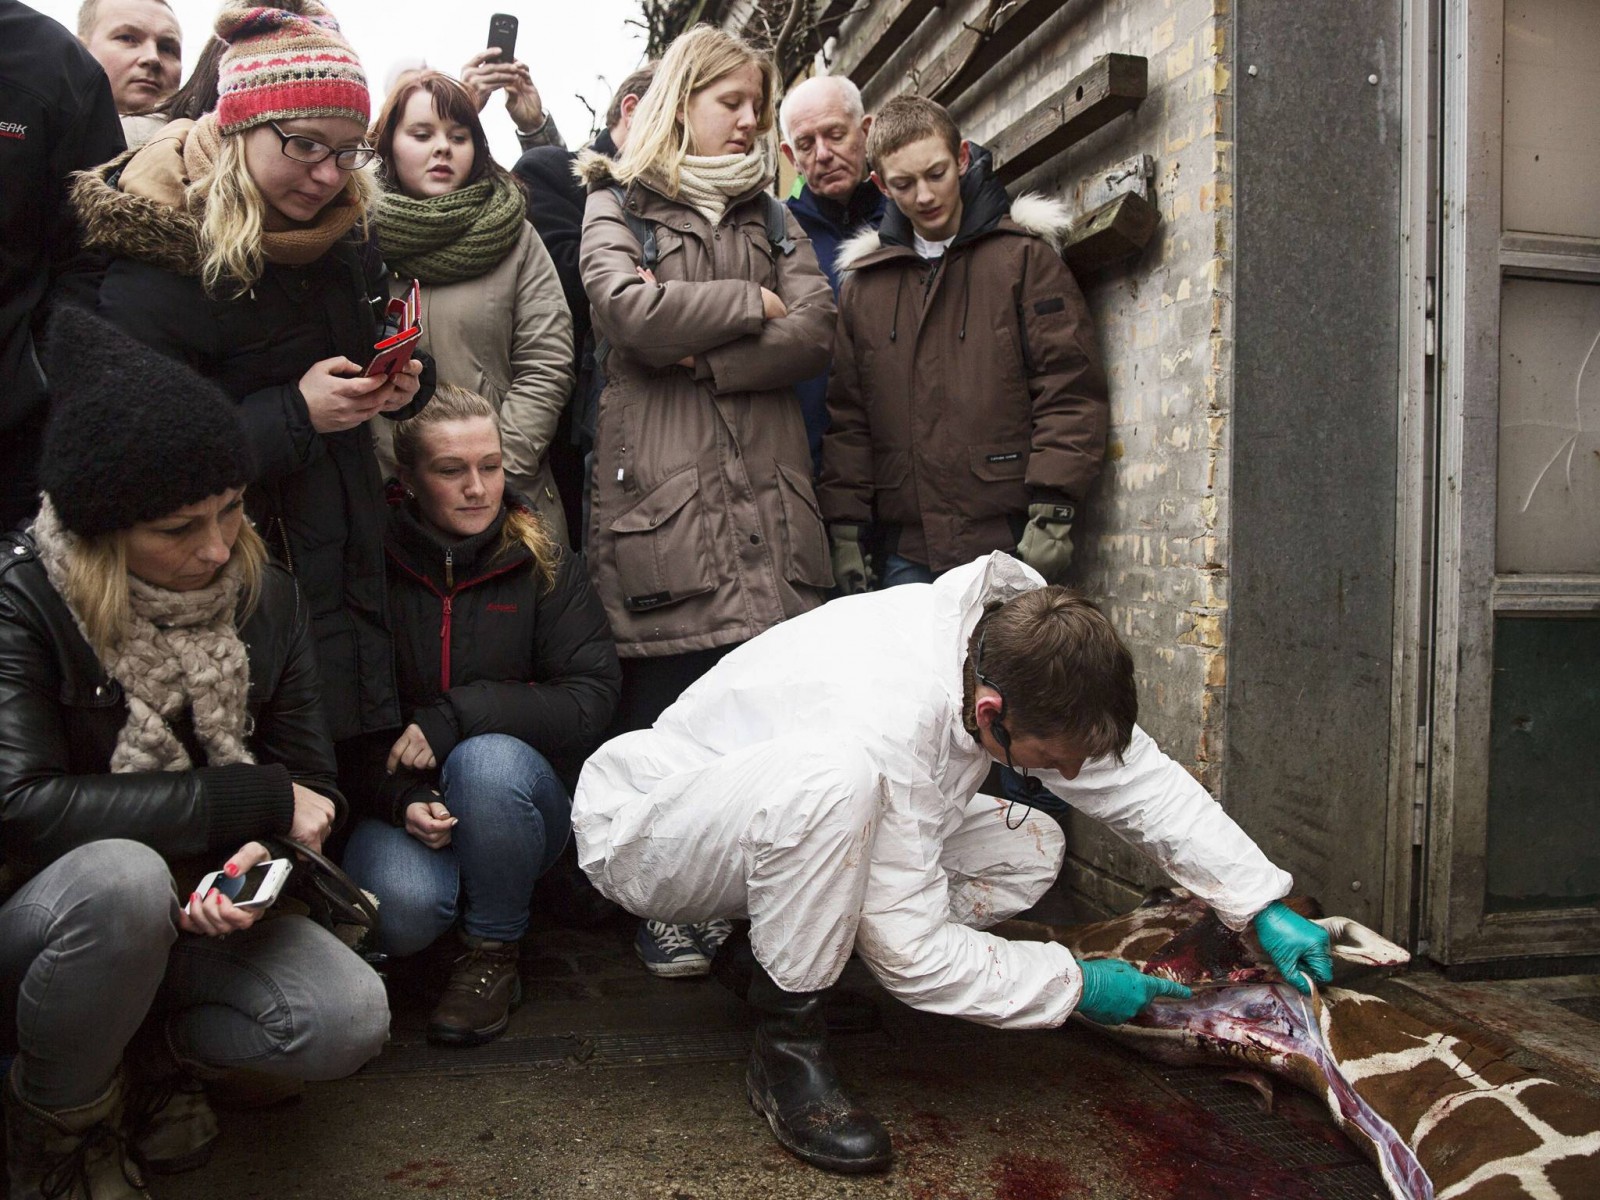 A vet skins Marius in front of a crowd at Copenhagen zoo (Photo Credit: AFP/Getty Images)